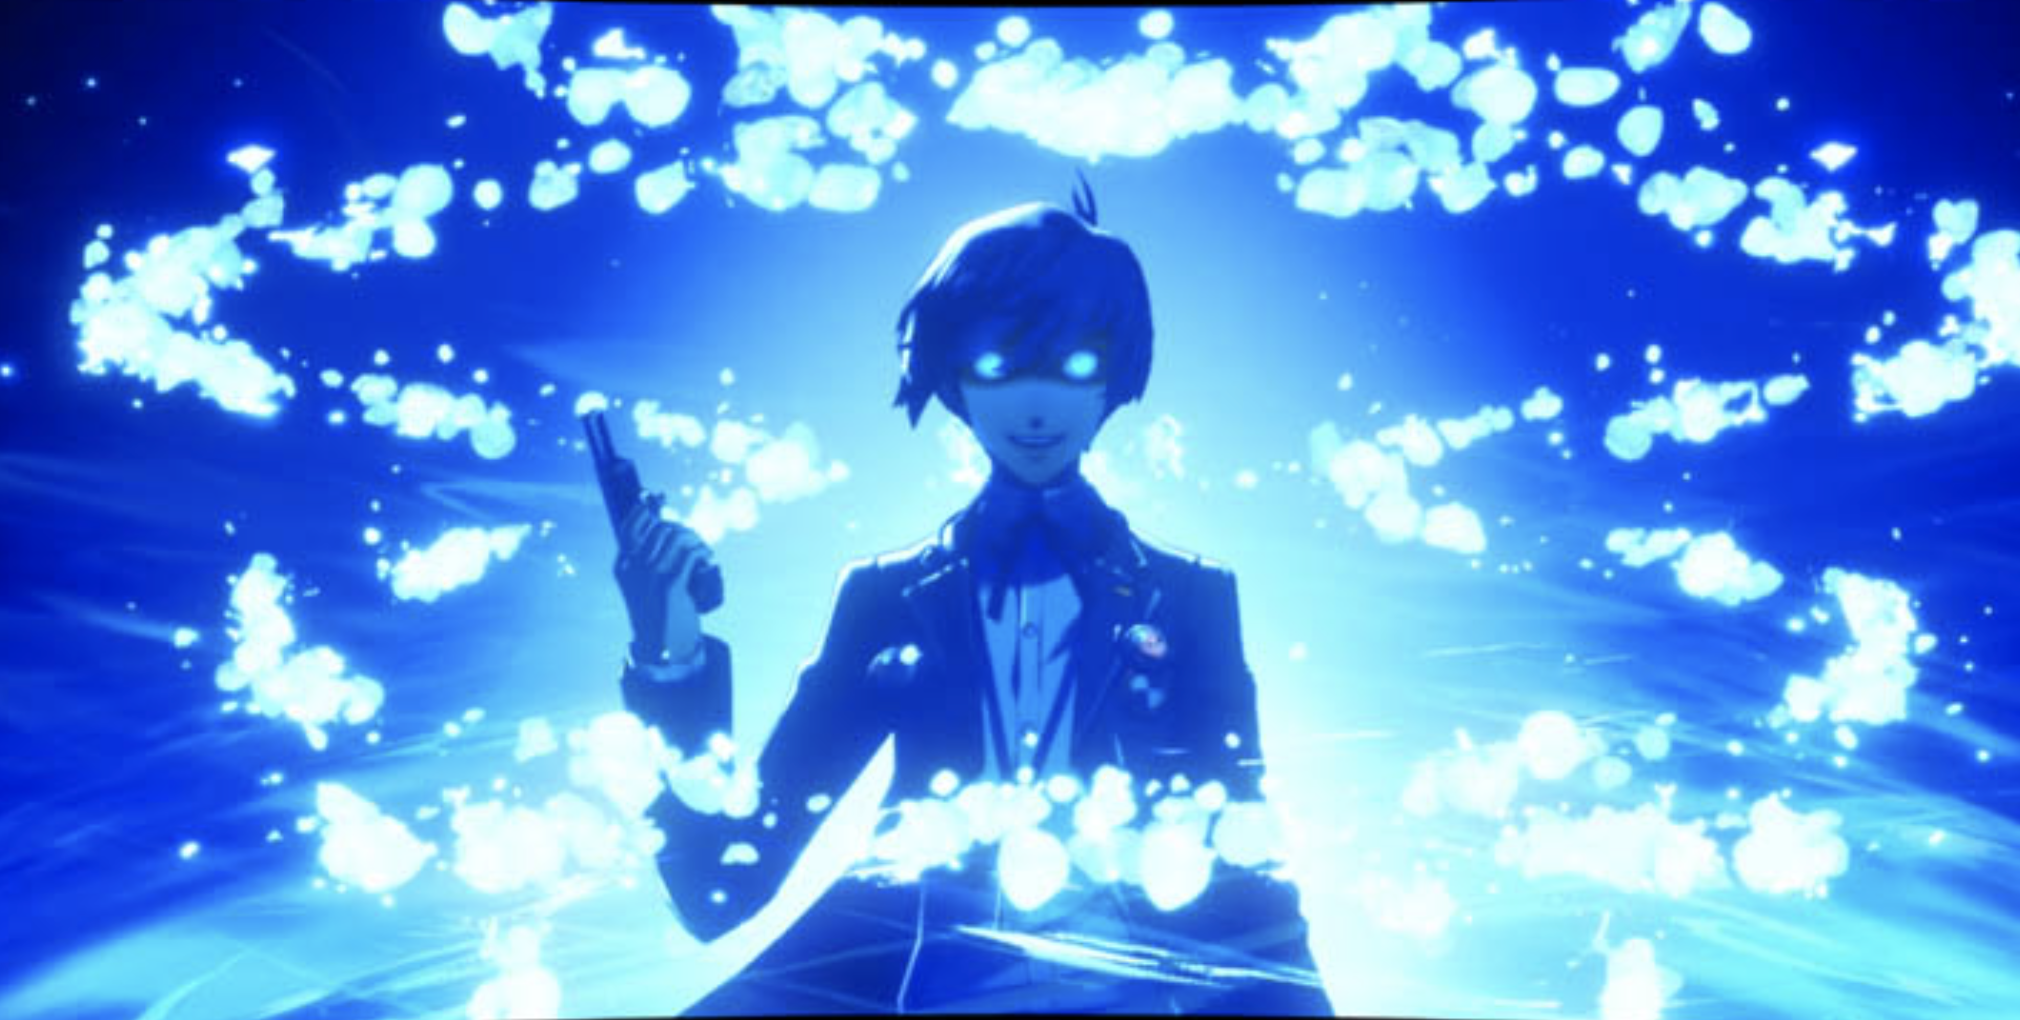 Persona 5 Tactica Officially Revealed, New Details, Screenshots - Persona  Central